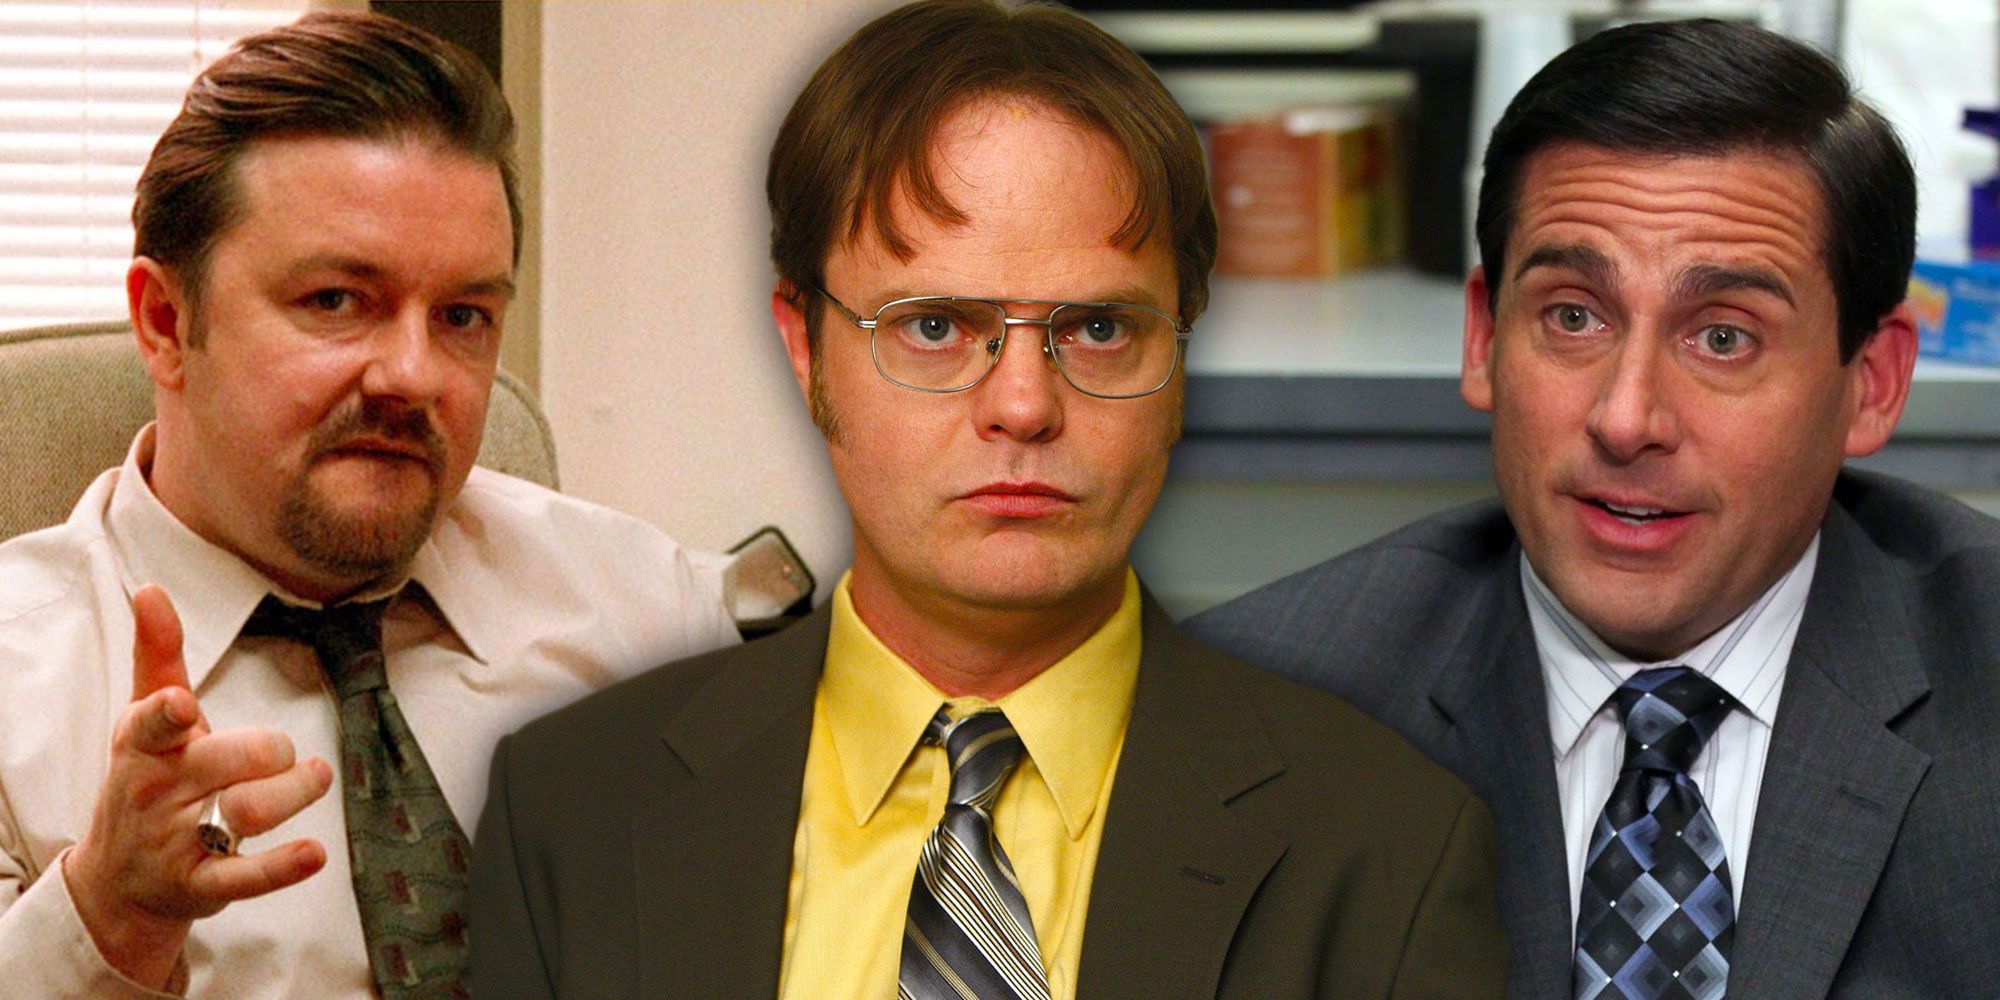 The Office UK Vs US: 15 Biggest Differences